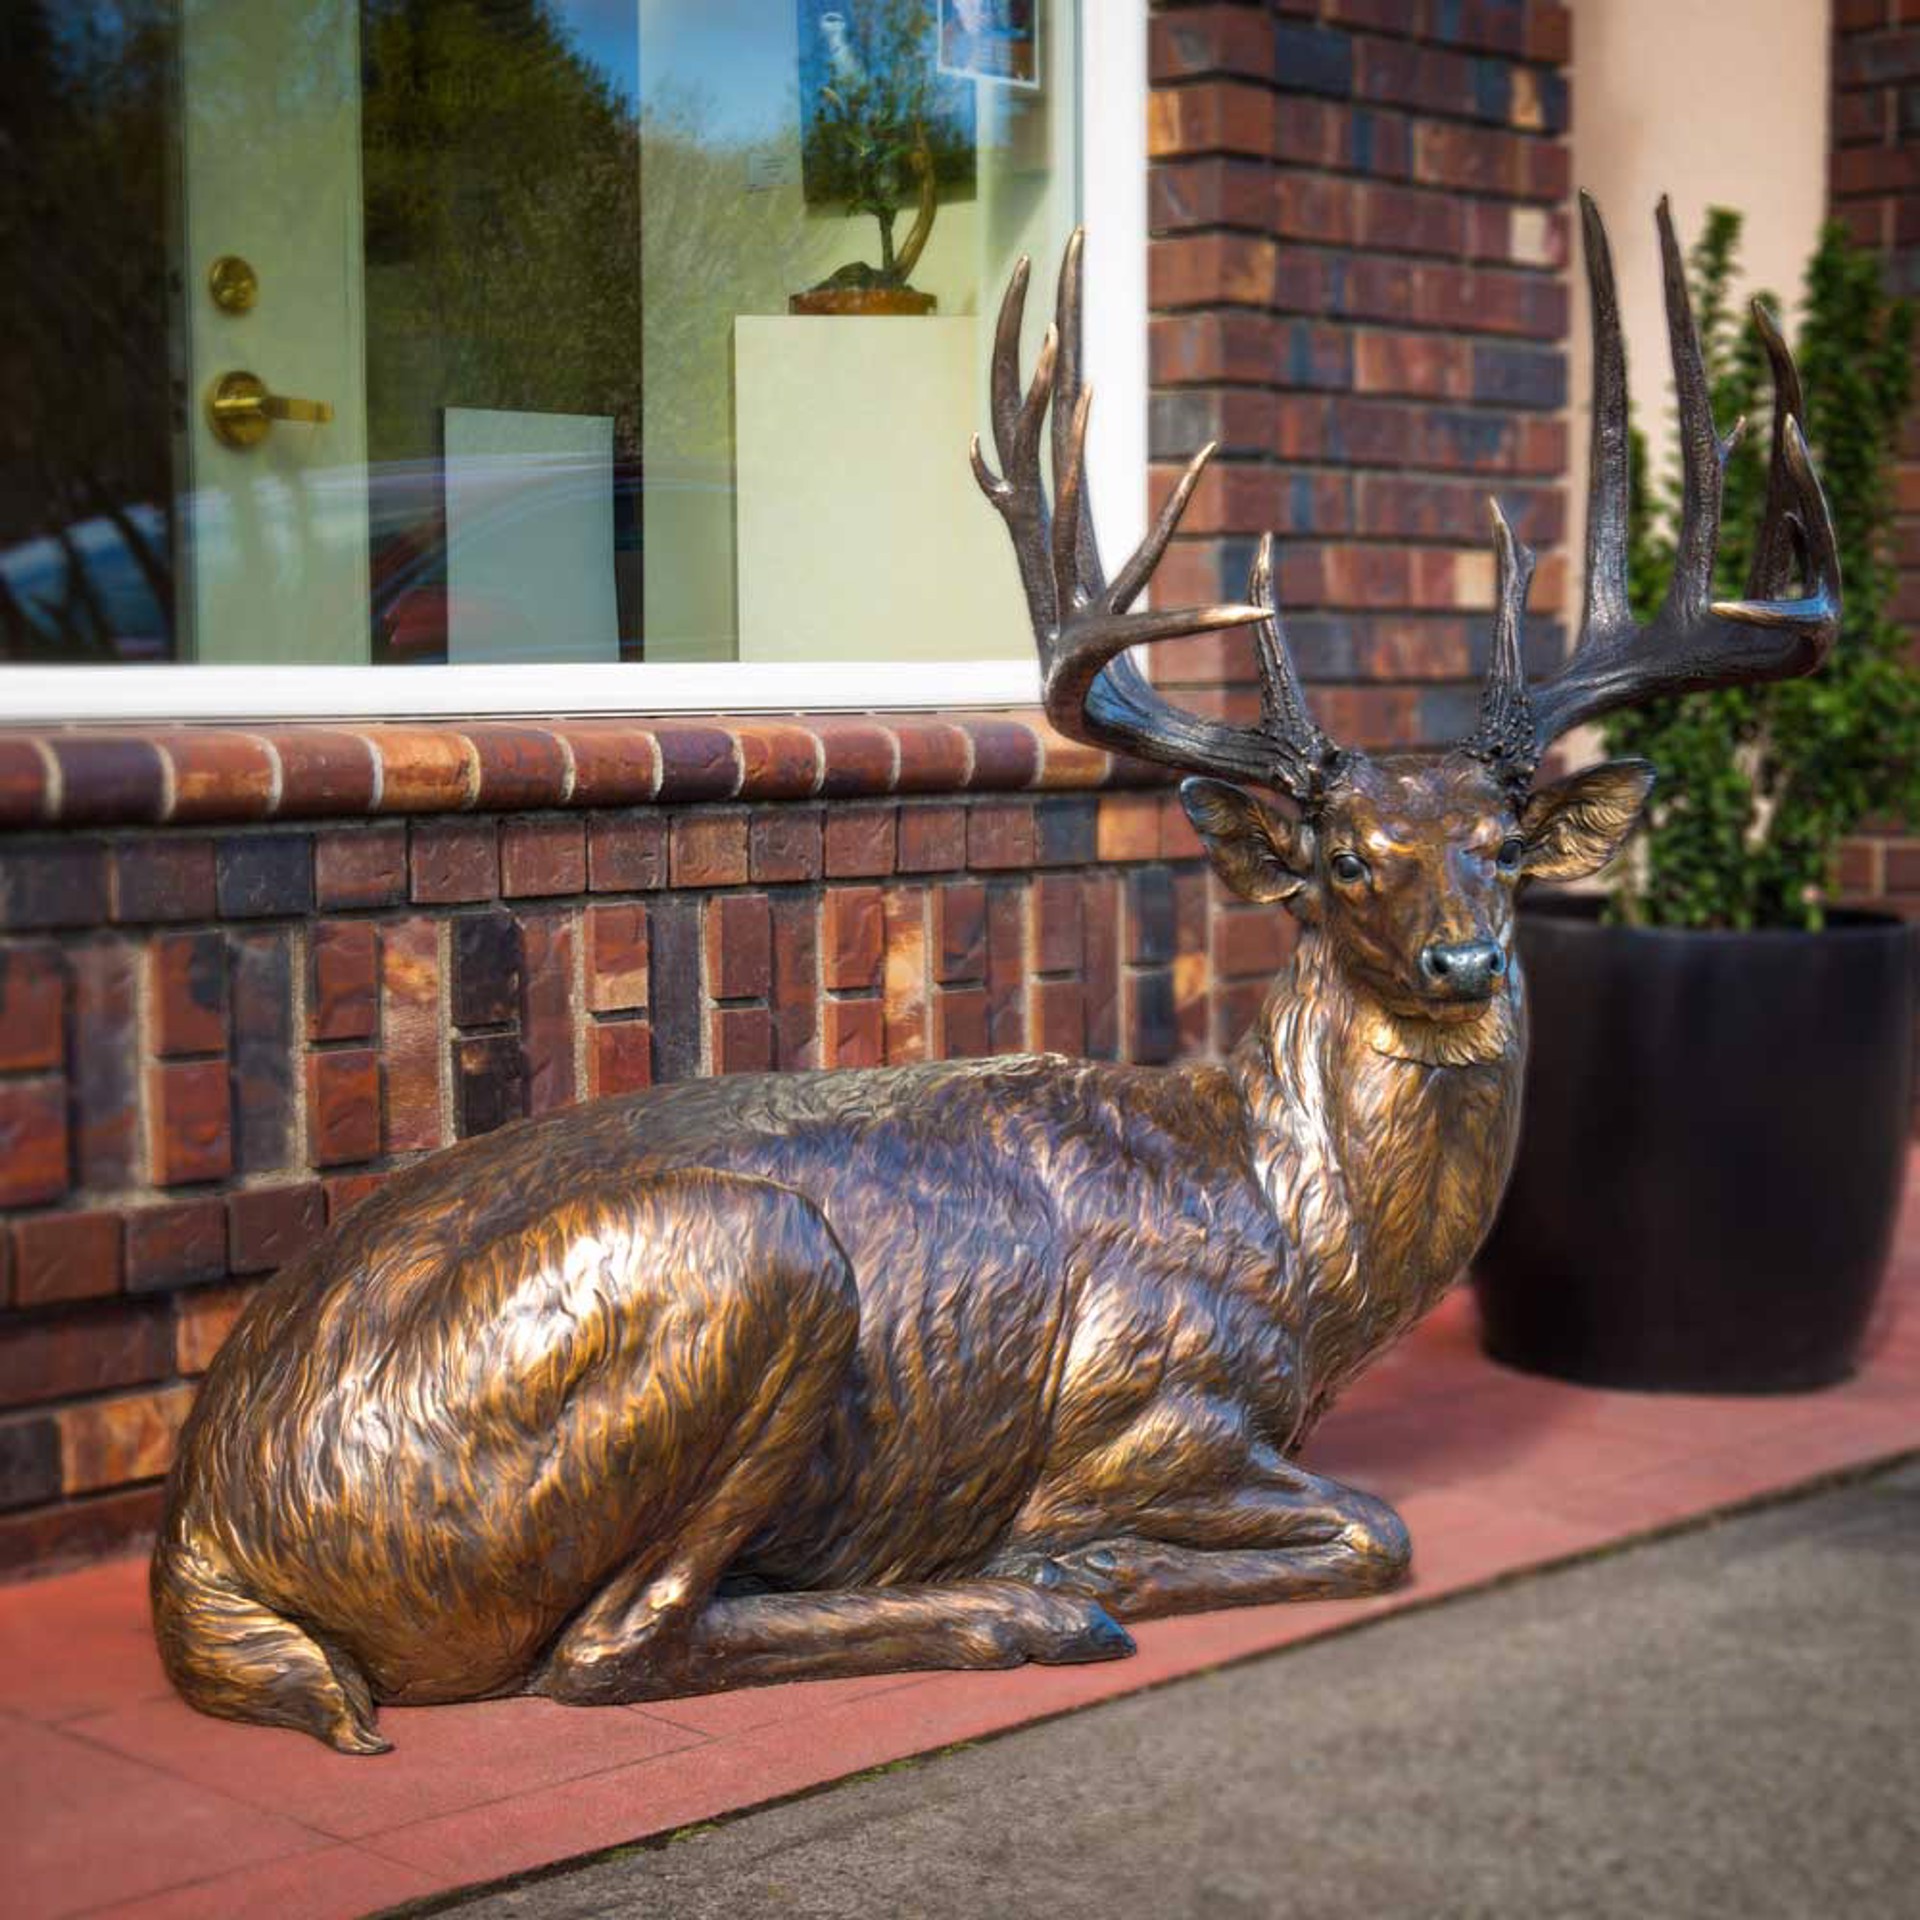 Life Size Whitetail Deer Original Bronze Sculpture by Rip and Alison Caswell, Contemporary Fine Art, Modern Wildlife Art, Available At Gallery Wild